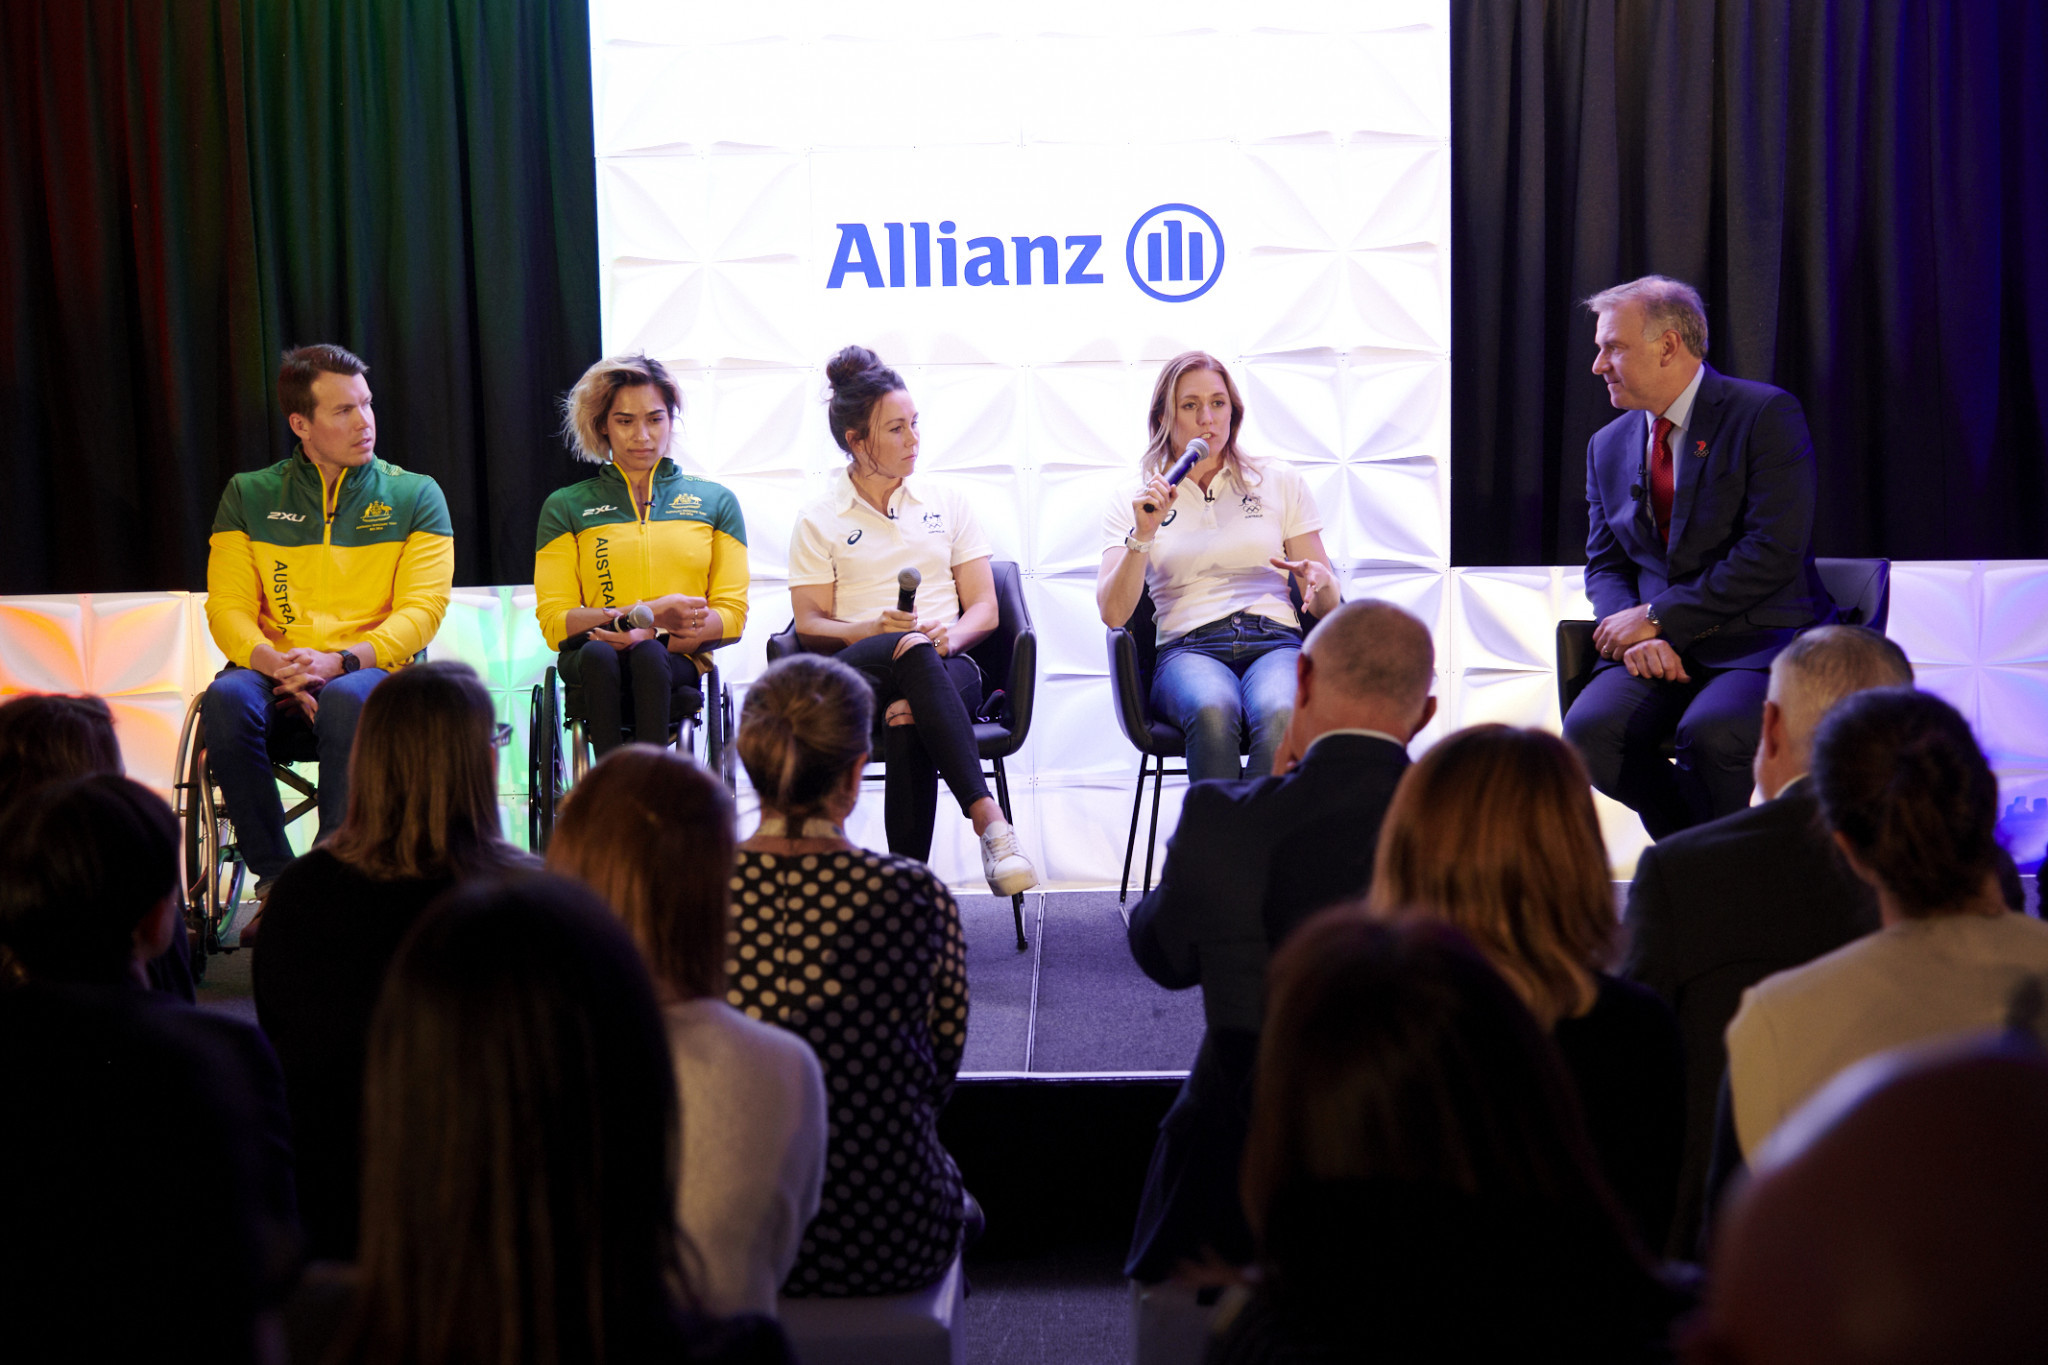 Allianz was announced in April 2019 as a backer of the Olympic teams until 2028 ©AOC